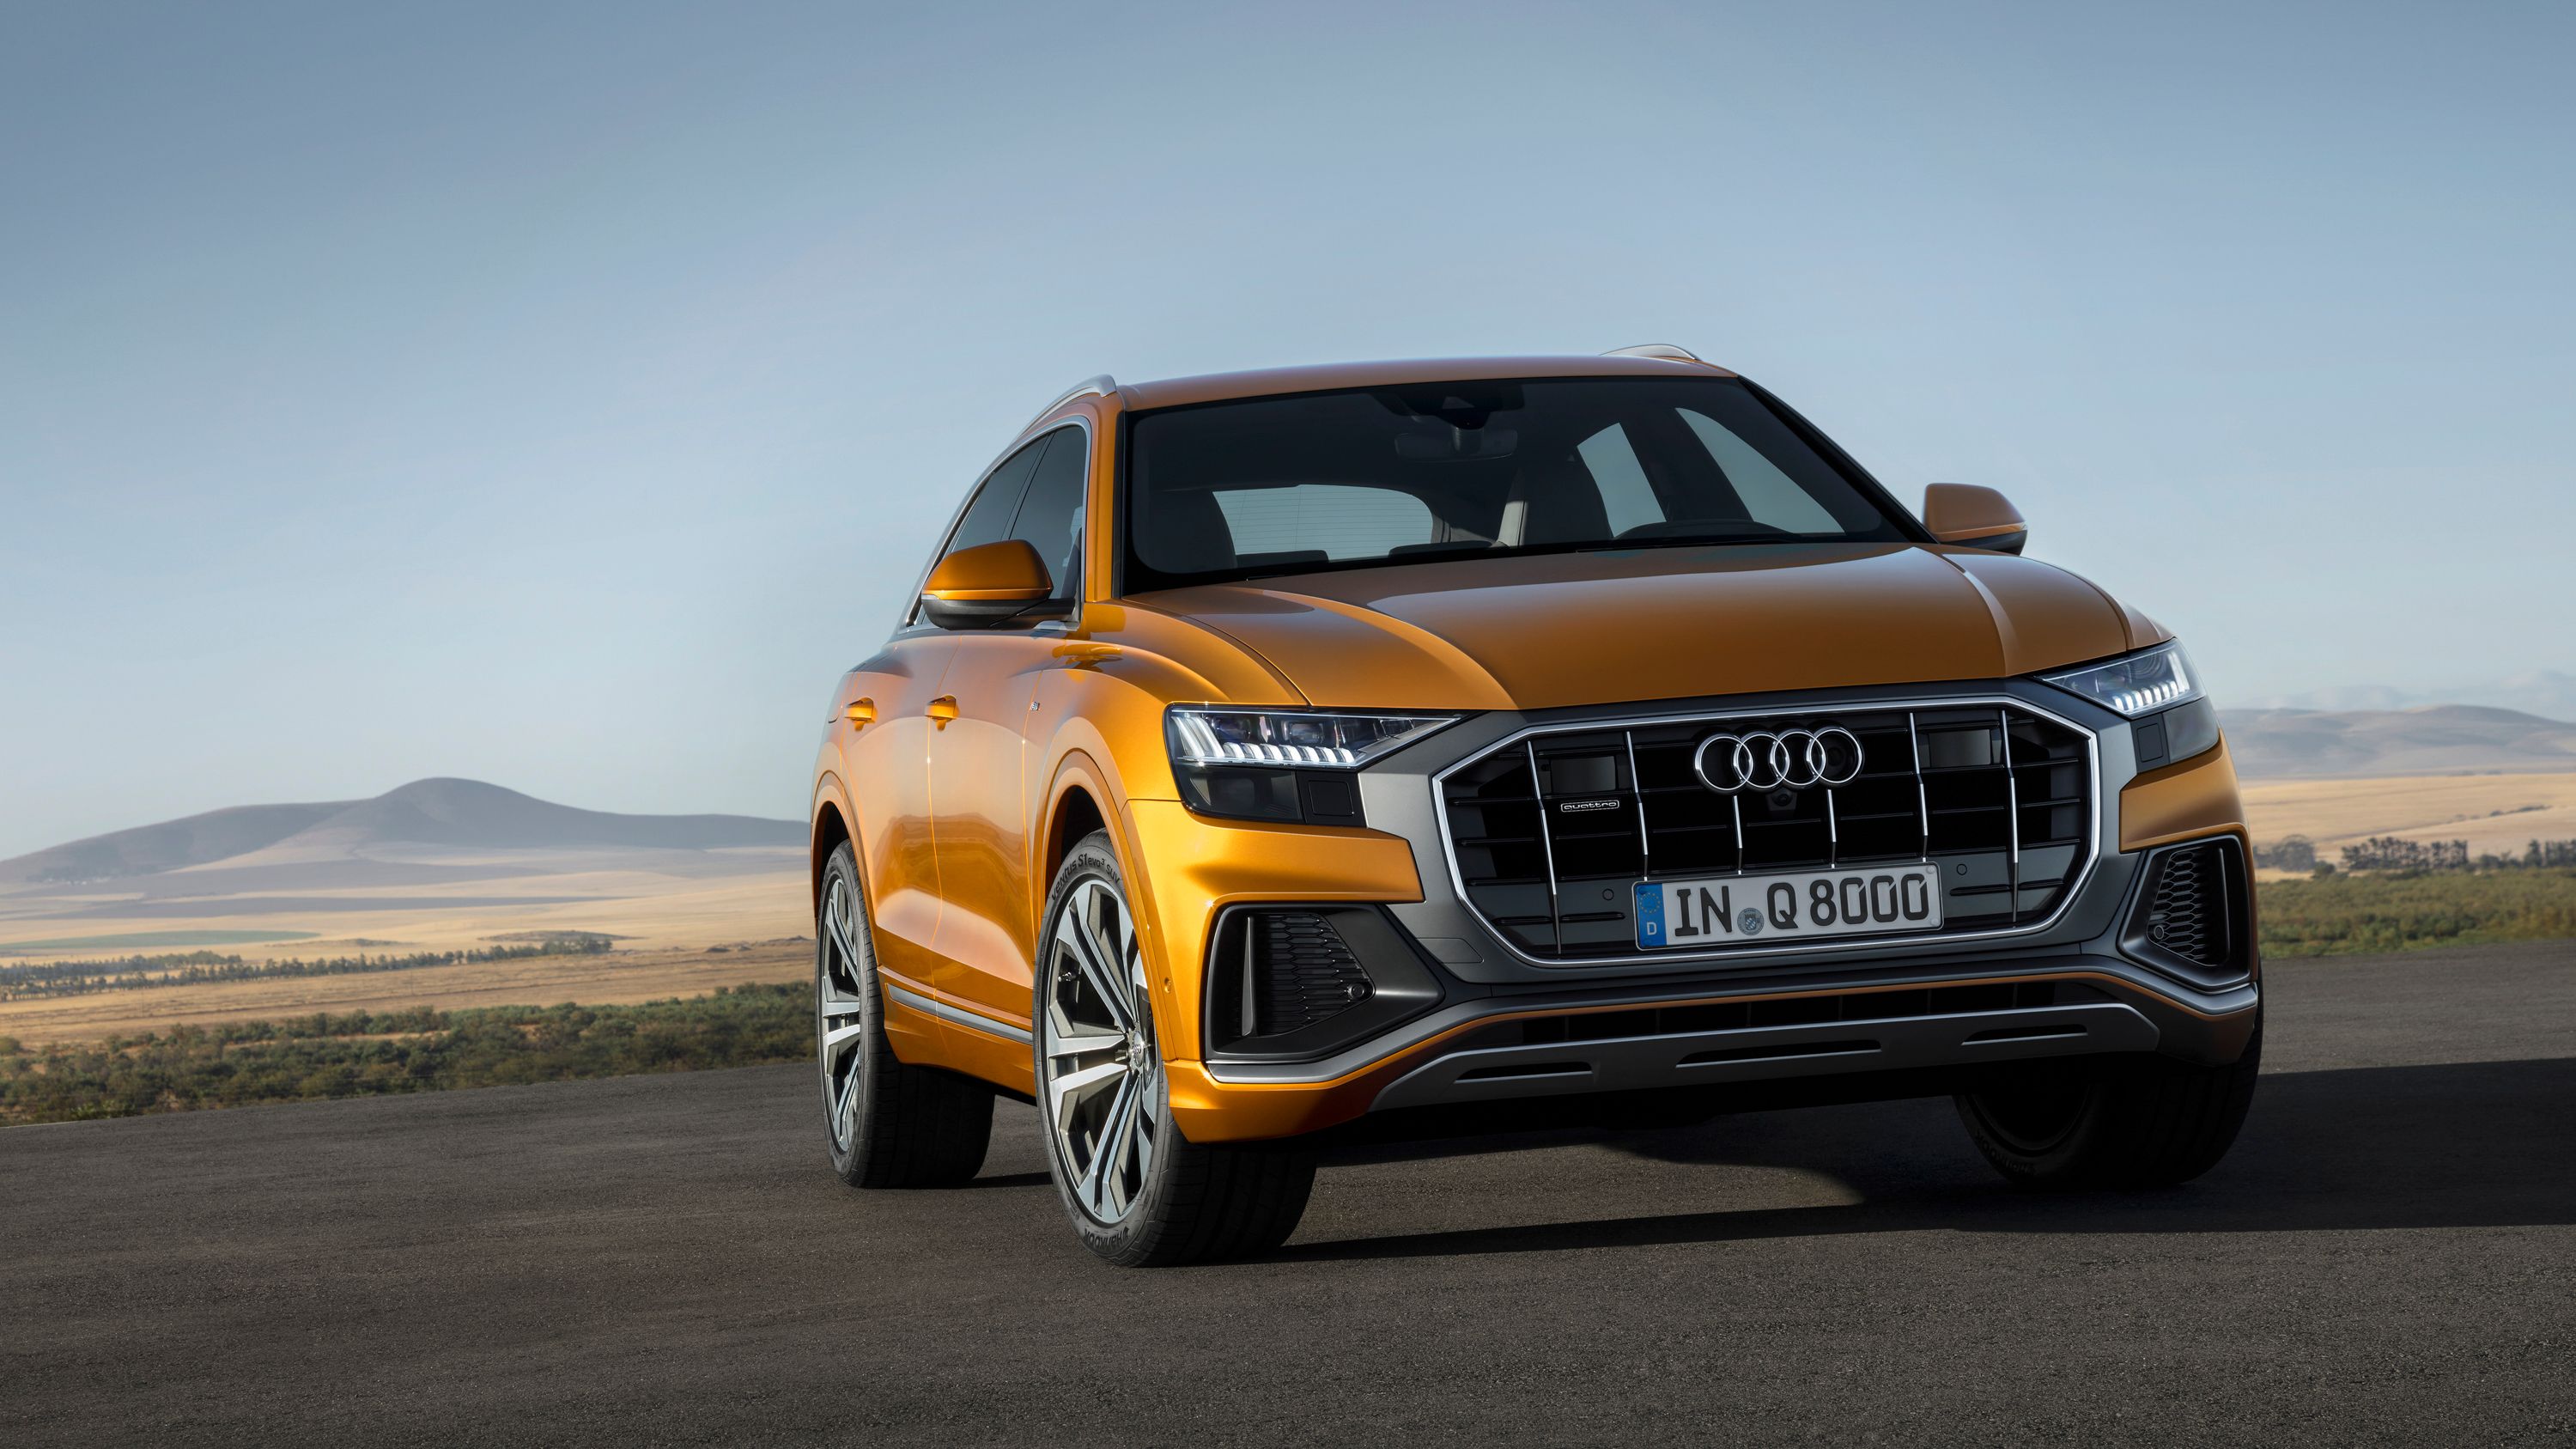 2018 Love It or Leave It - The 2019 Audi Q8